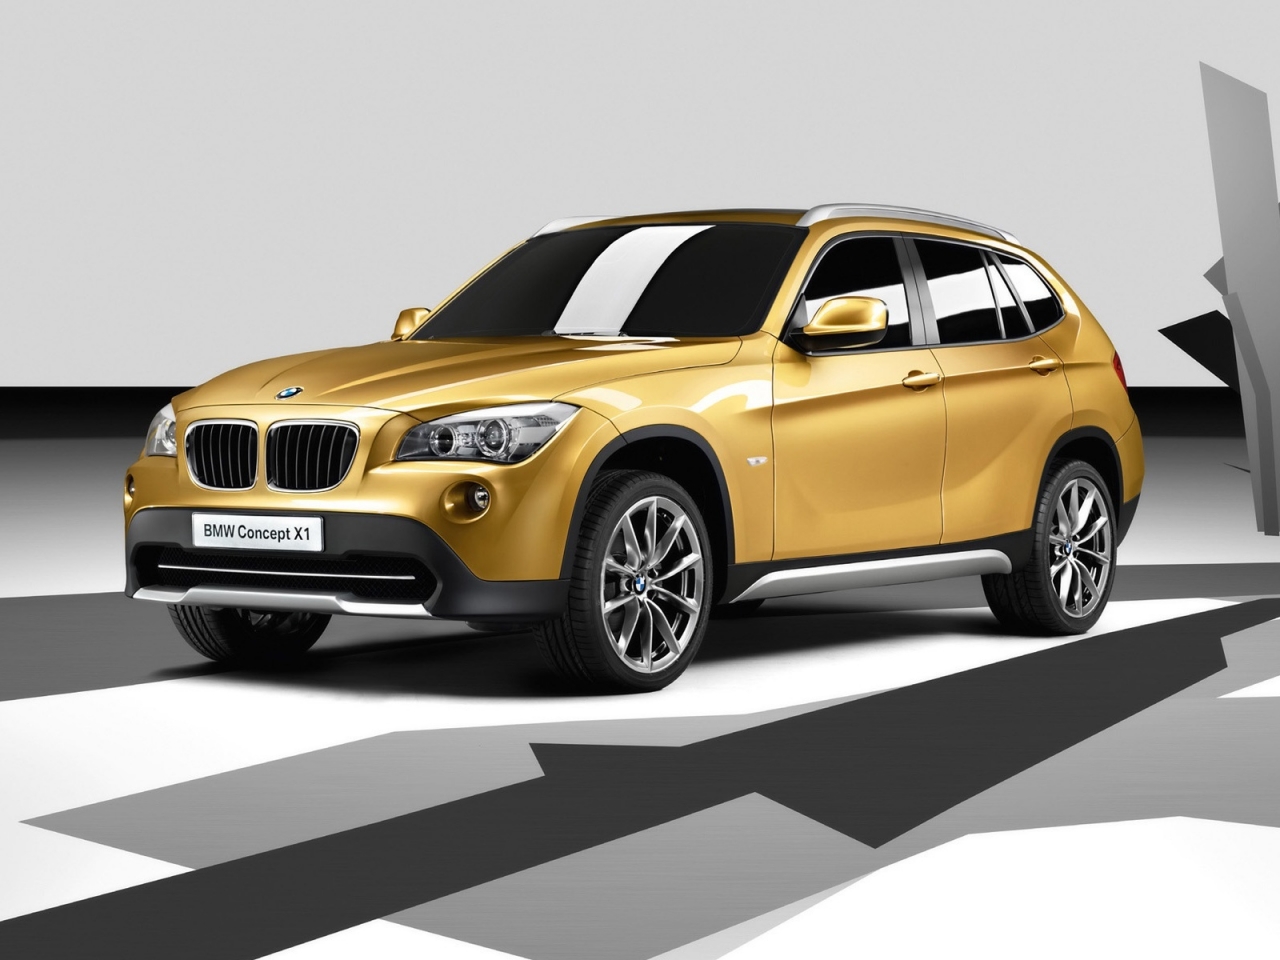 BMW Concept X1 2008 for 1280 x 960 resolution